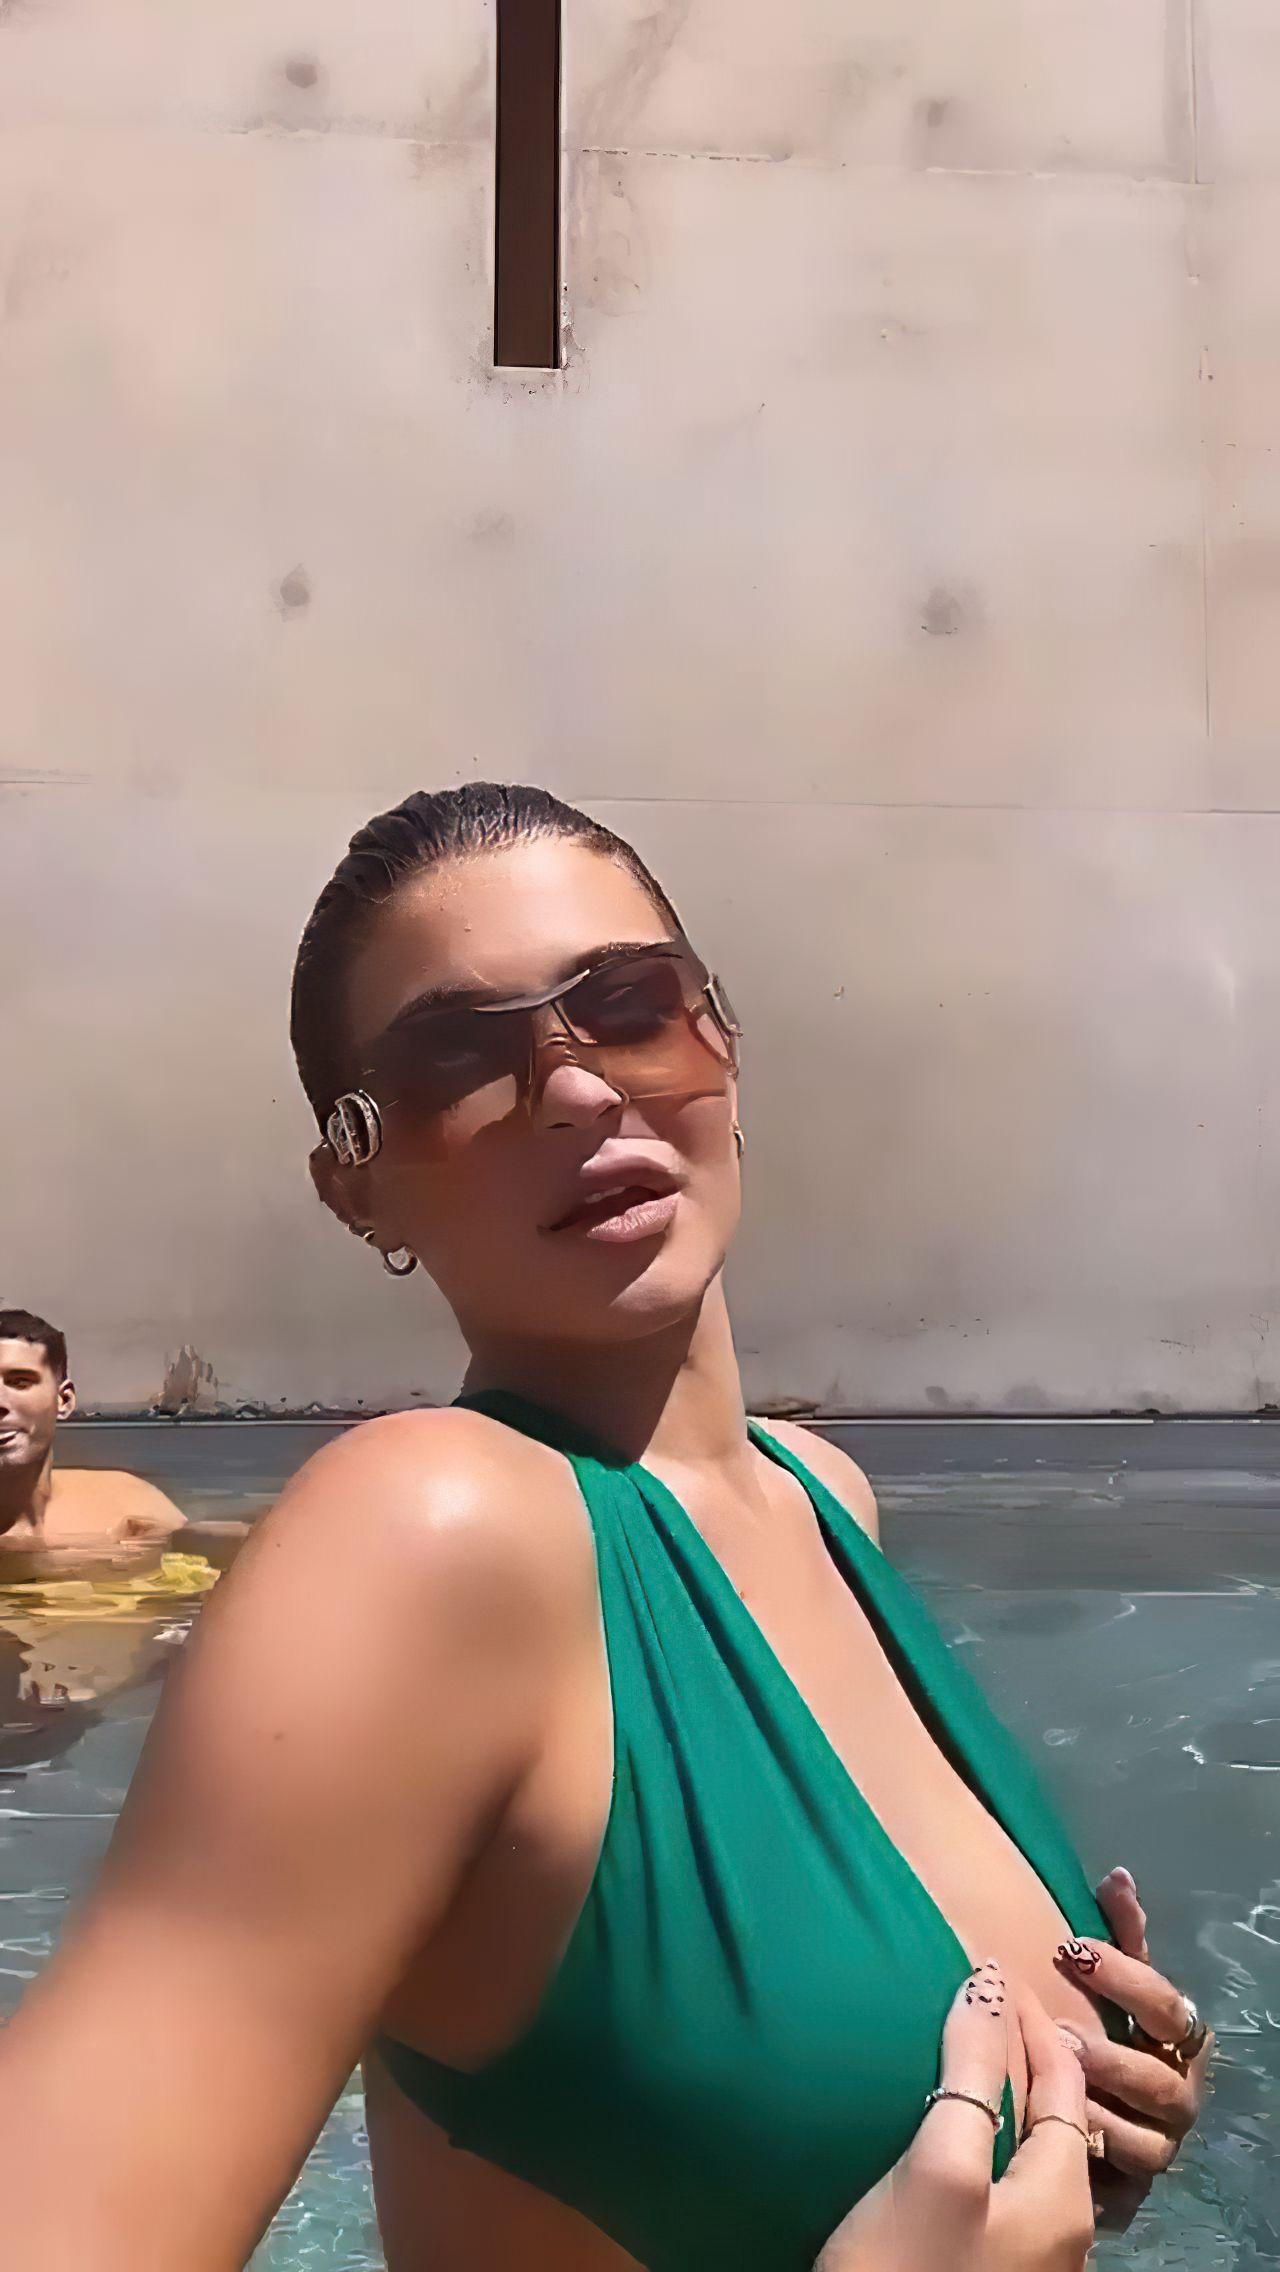 Kylie Jenner looks enthralling in the pool as she flaunts her curves 13